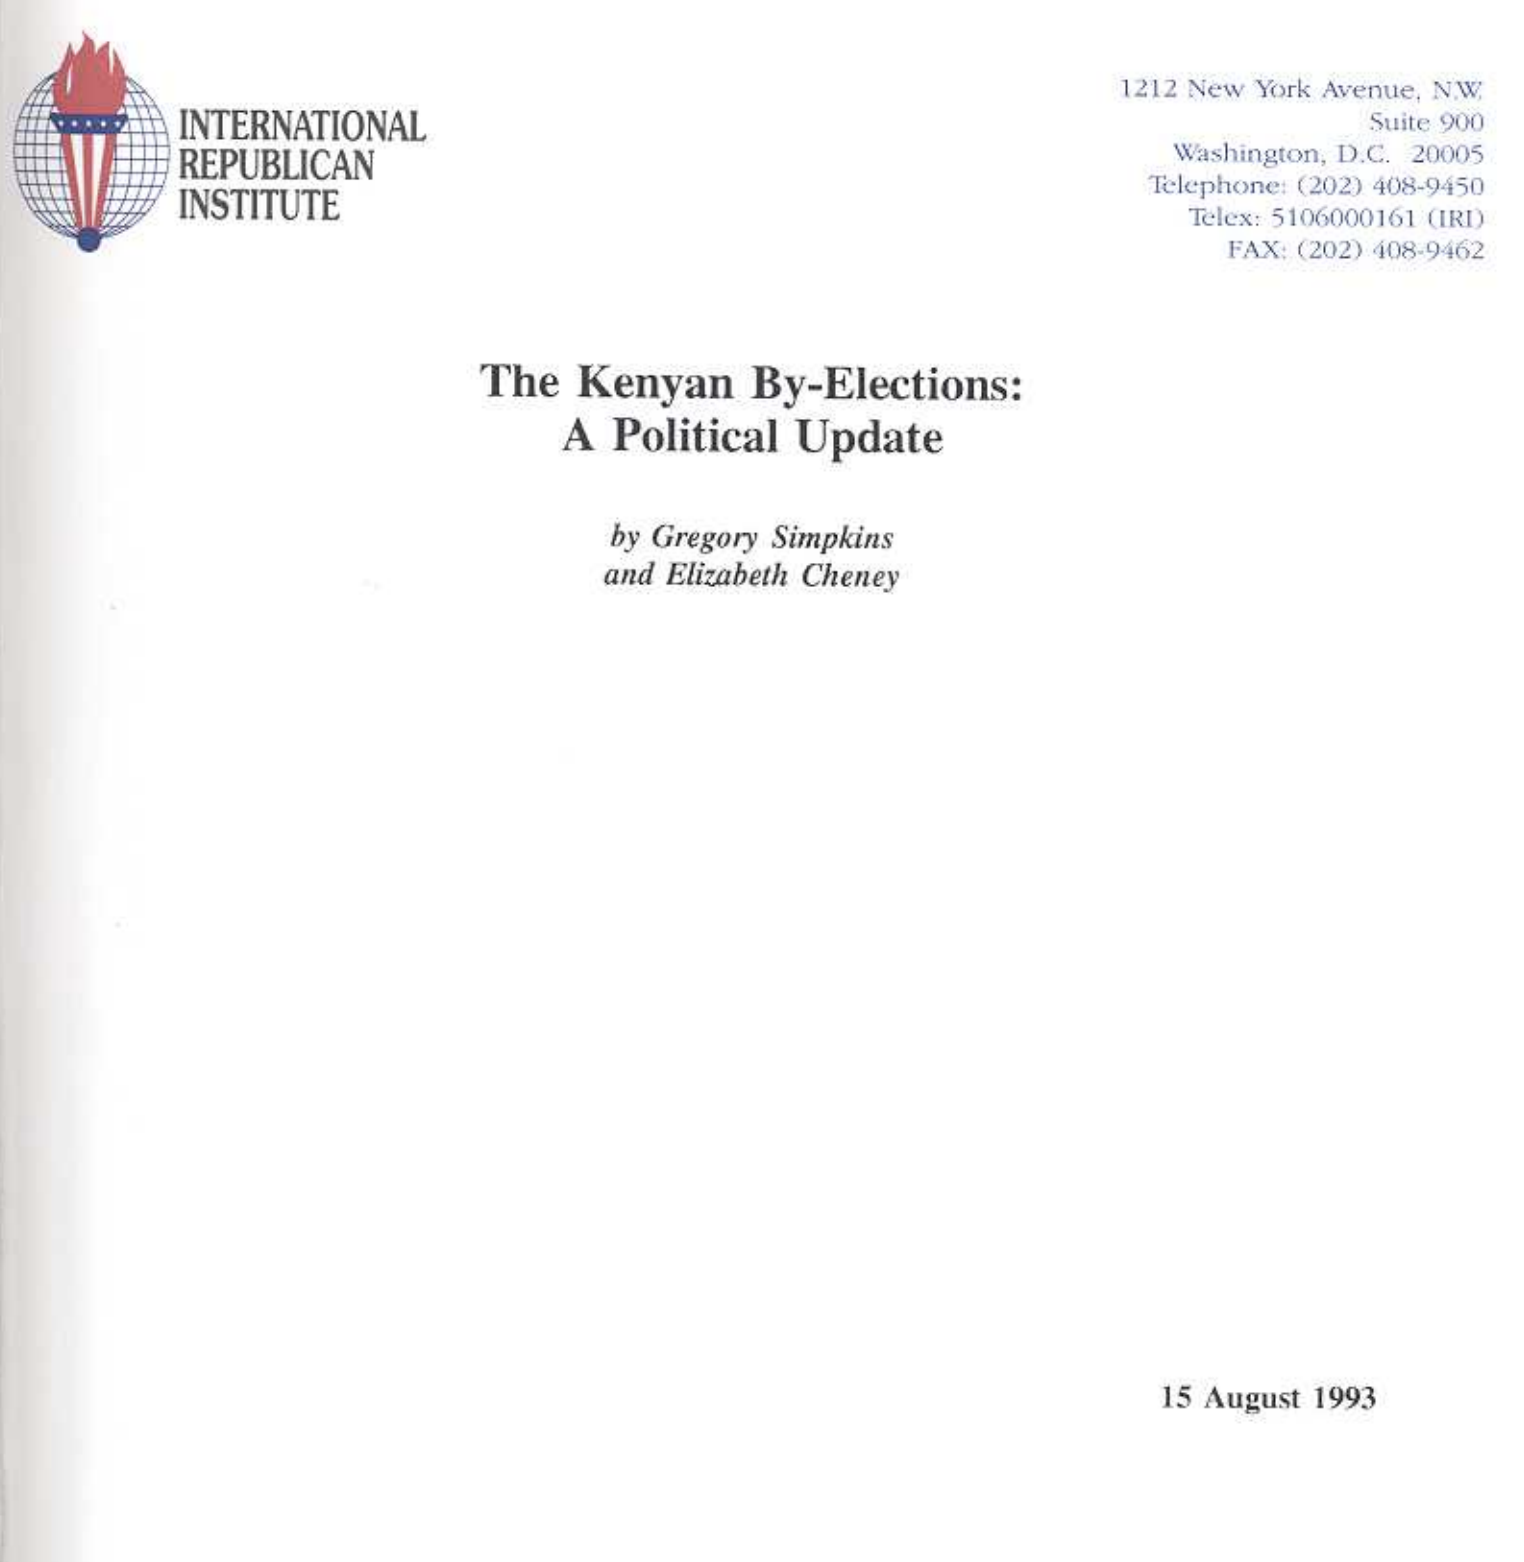 The Kenyan By-Elections: A Political Update by Gregory Simpkins and Elizabeth Cheney (Aug 1993)